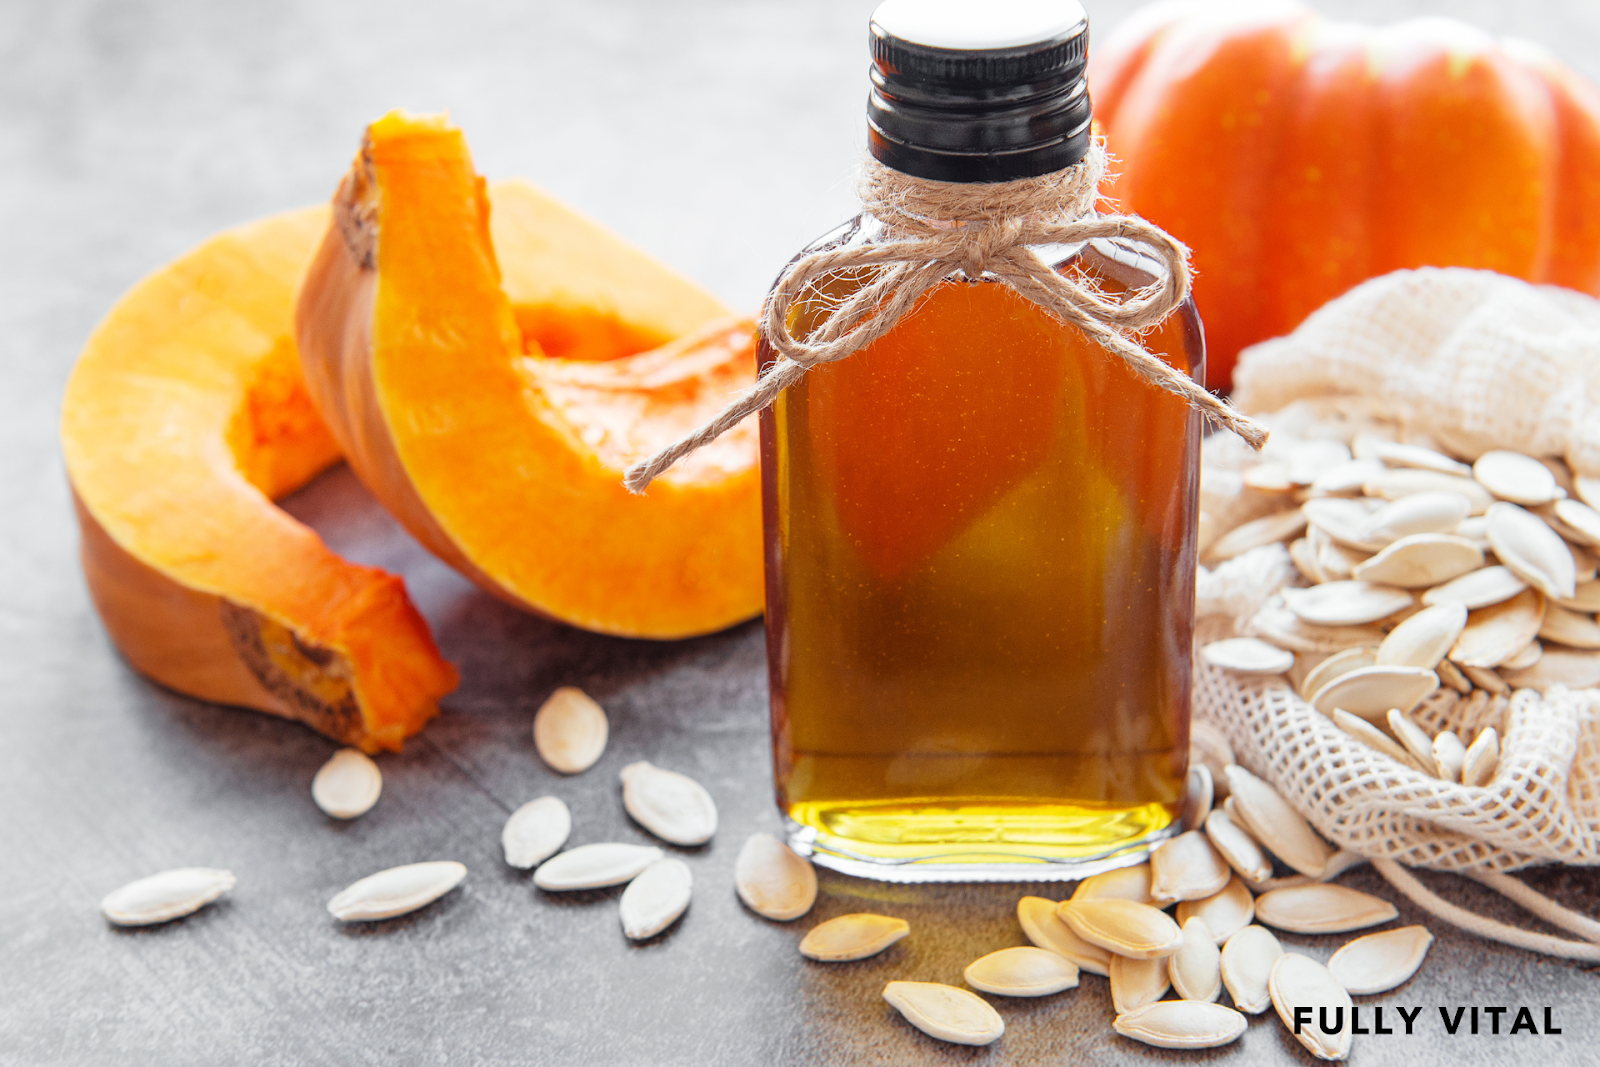 Pumpkin Seed Oil: Can It Promote Hair Growth?